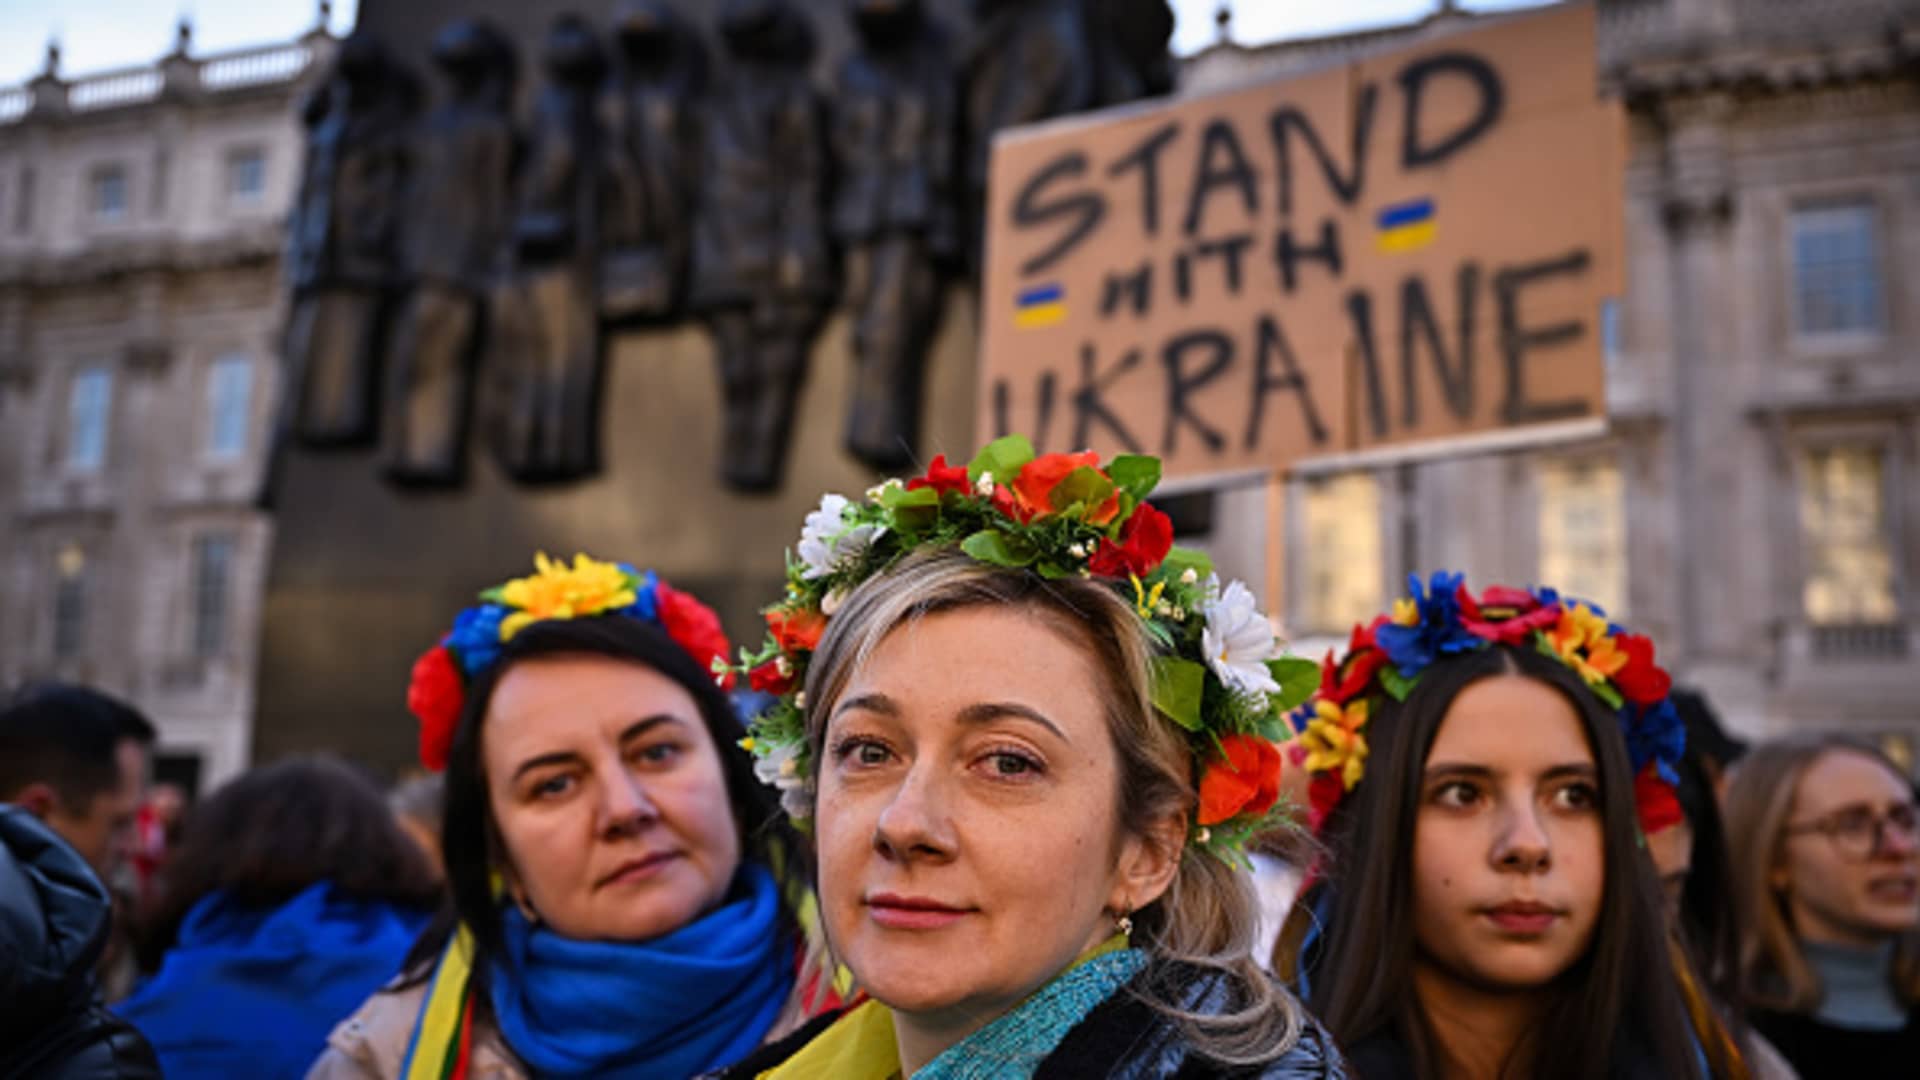 Supporters of Ukraine demonstrate in Whitehall outside of Downing Street the residence of the UK Prime Minister Boris Johnson for a third successive day on February 26, 2022 in London, England. Russia's attack on Ukraine this week has incited a wave of protests across Europe and beyond, and a raft of sanctions aimed at Russian politicians and institutions.